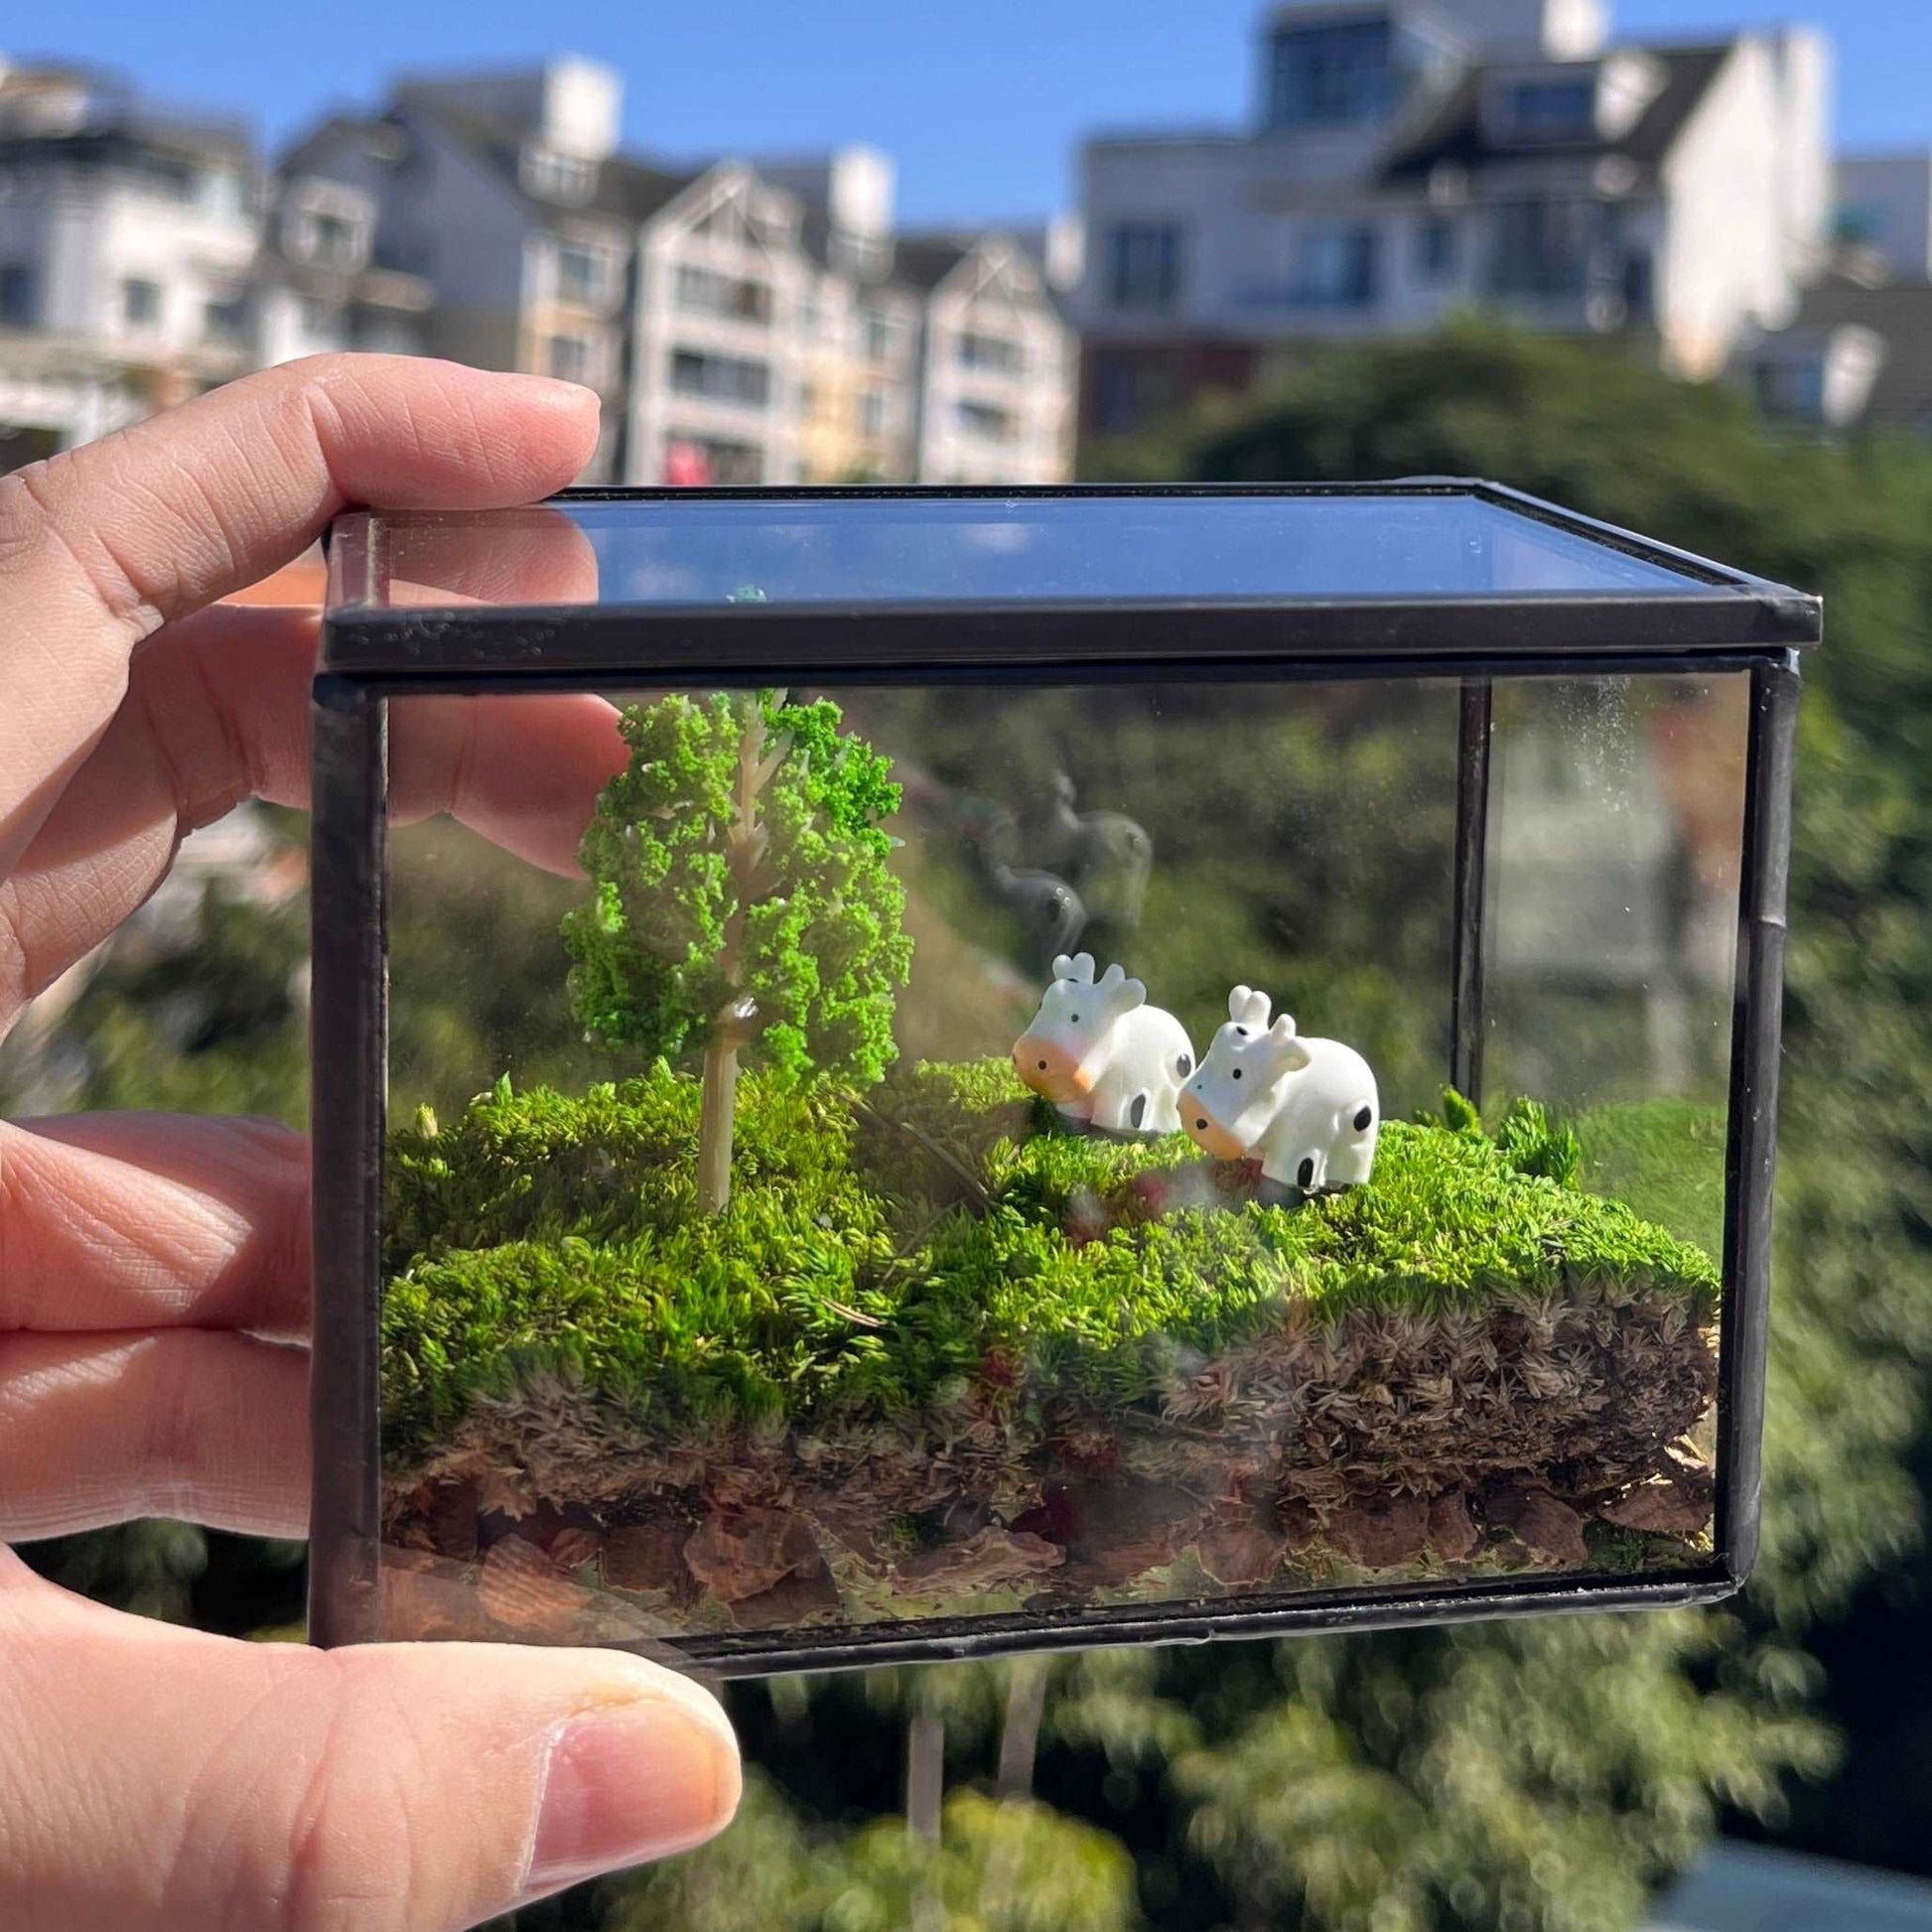 Micro Landscape Mini Cows Handmade Glass Terrarium Preserved Mossbox MAdd a dash of pastoral charm to your desk with our "Pastoral Play" Miniature Cow Scene, a handmade glass terrarium that combines the beauty of a glass terrarium with